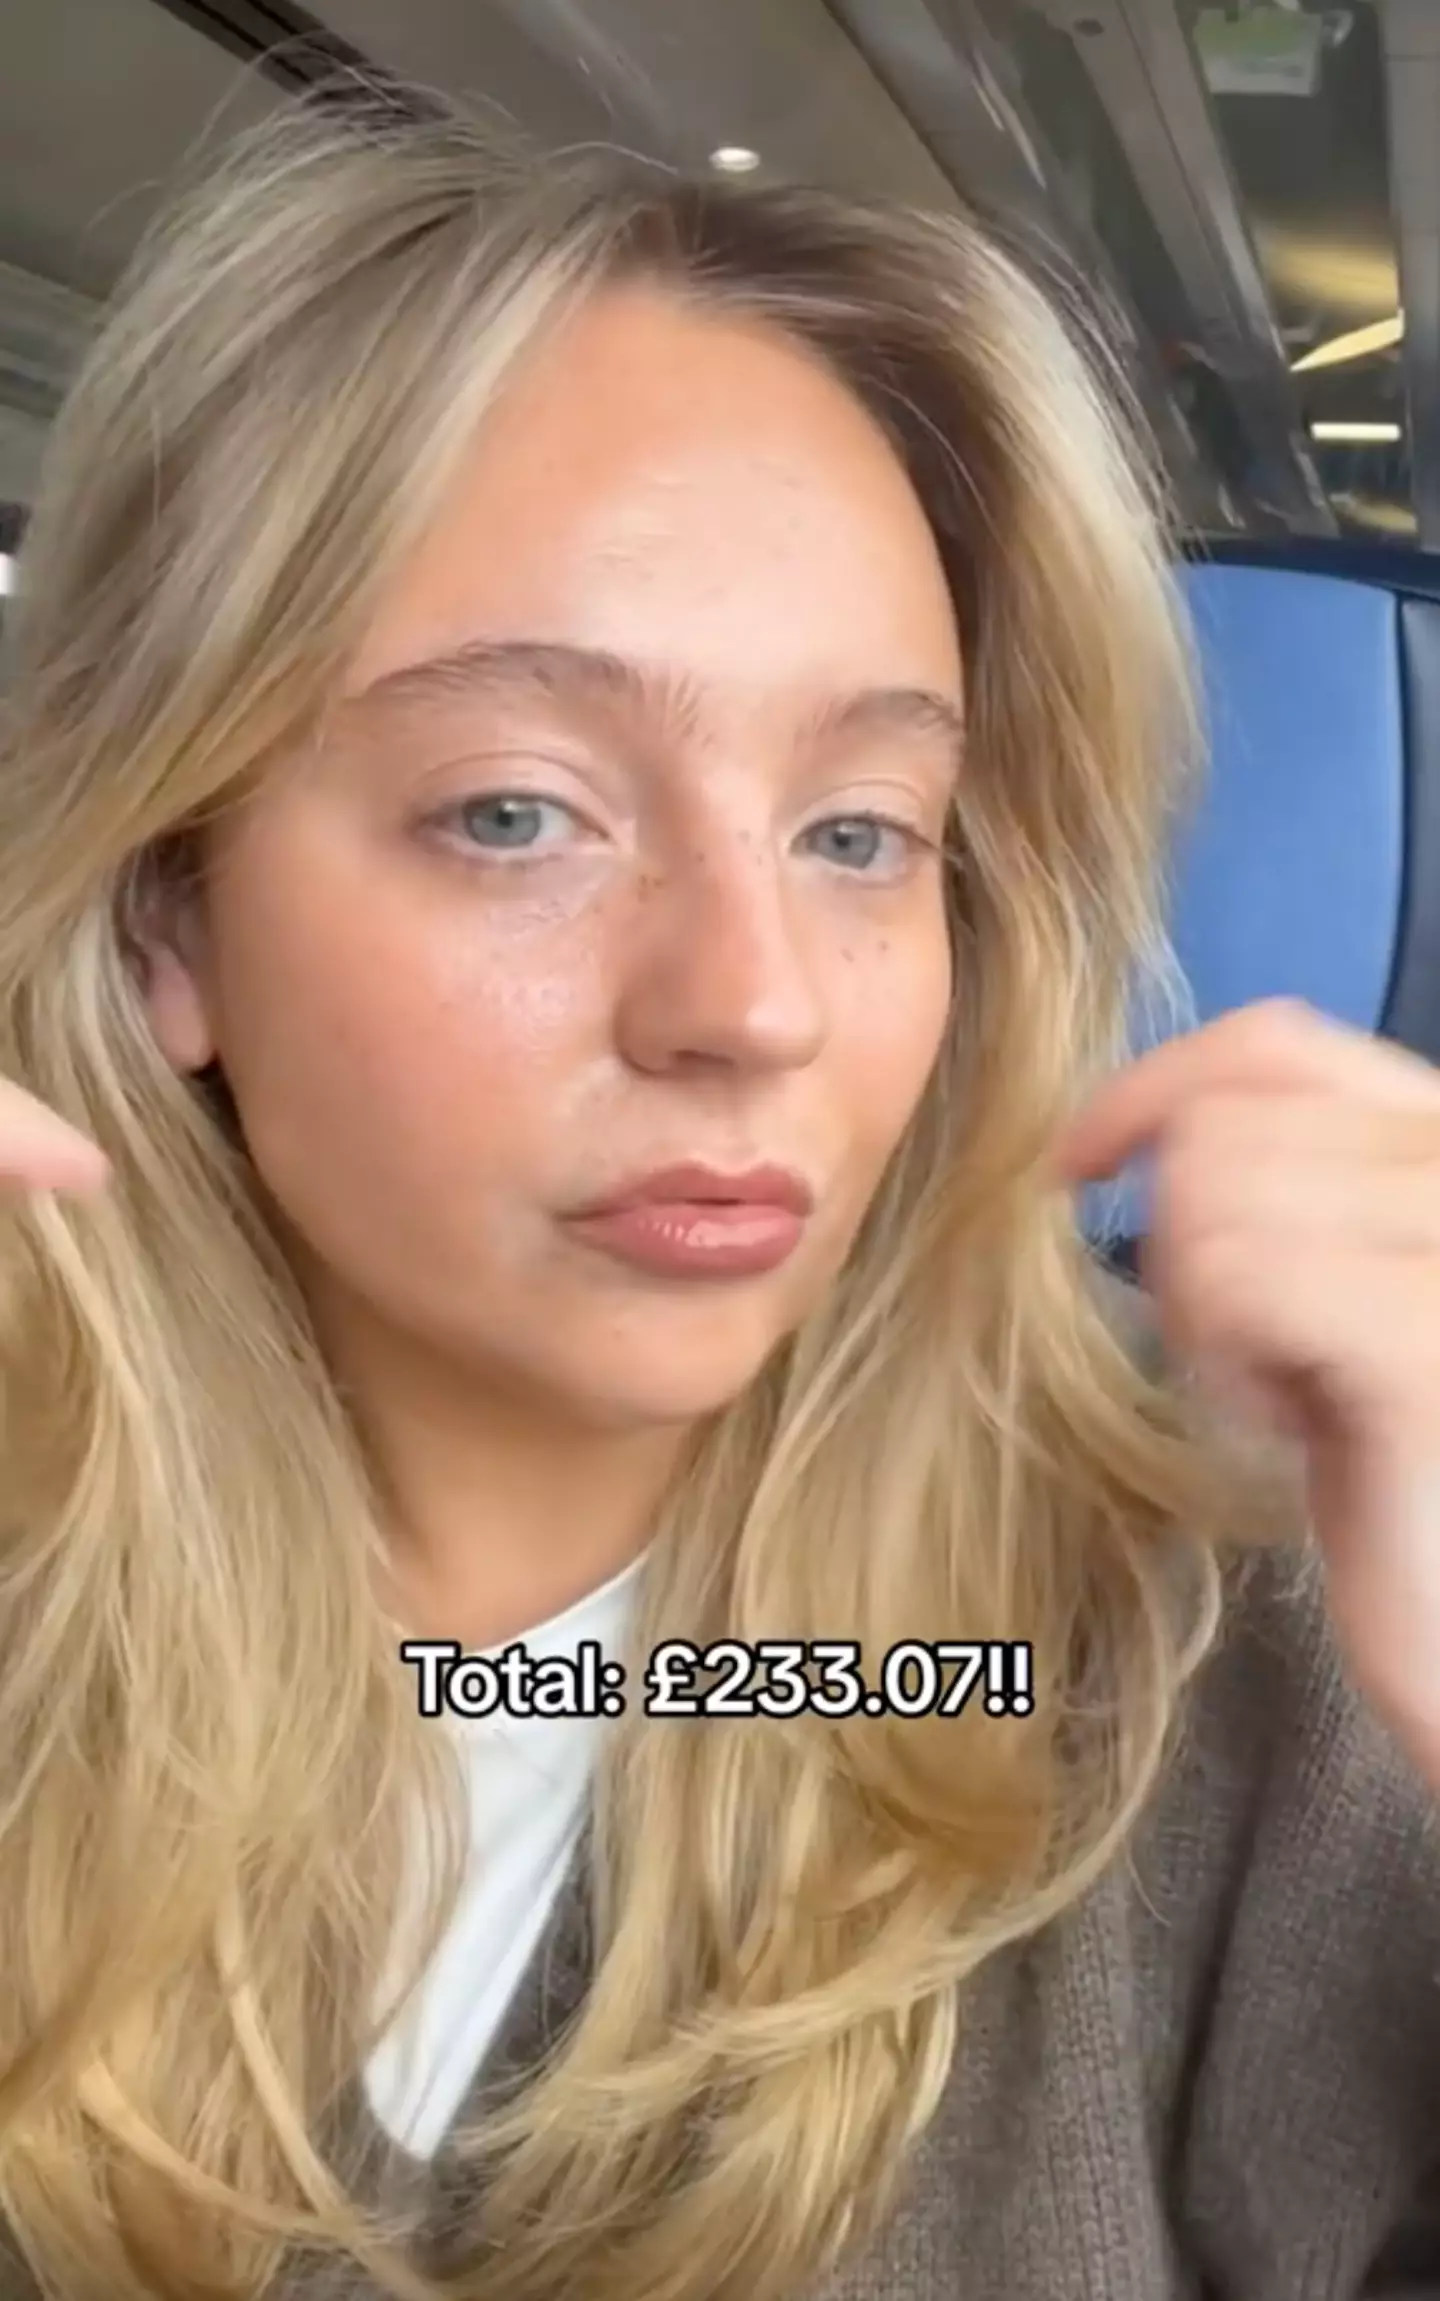 She included the total cost of the make-up she was wearing.